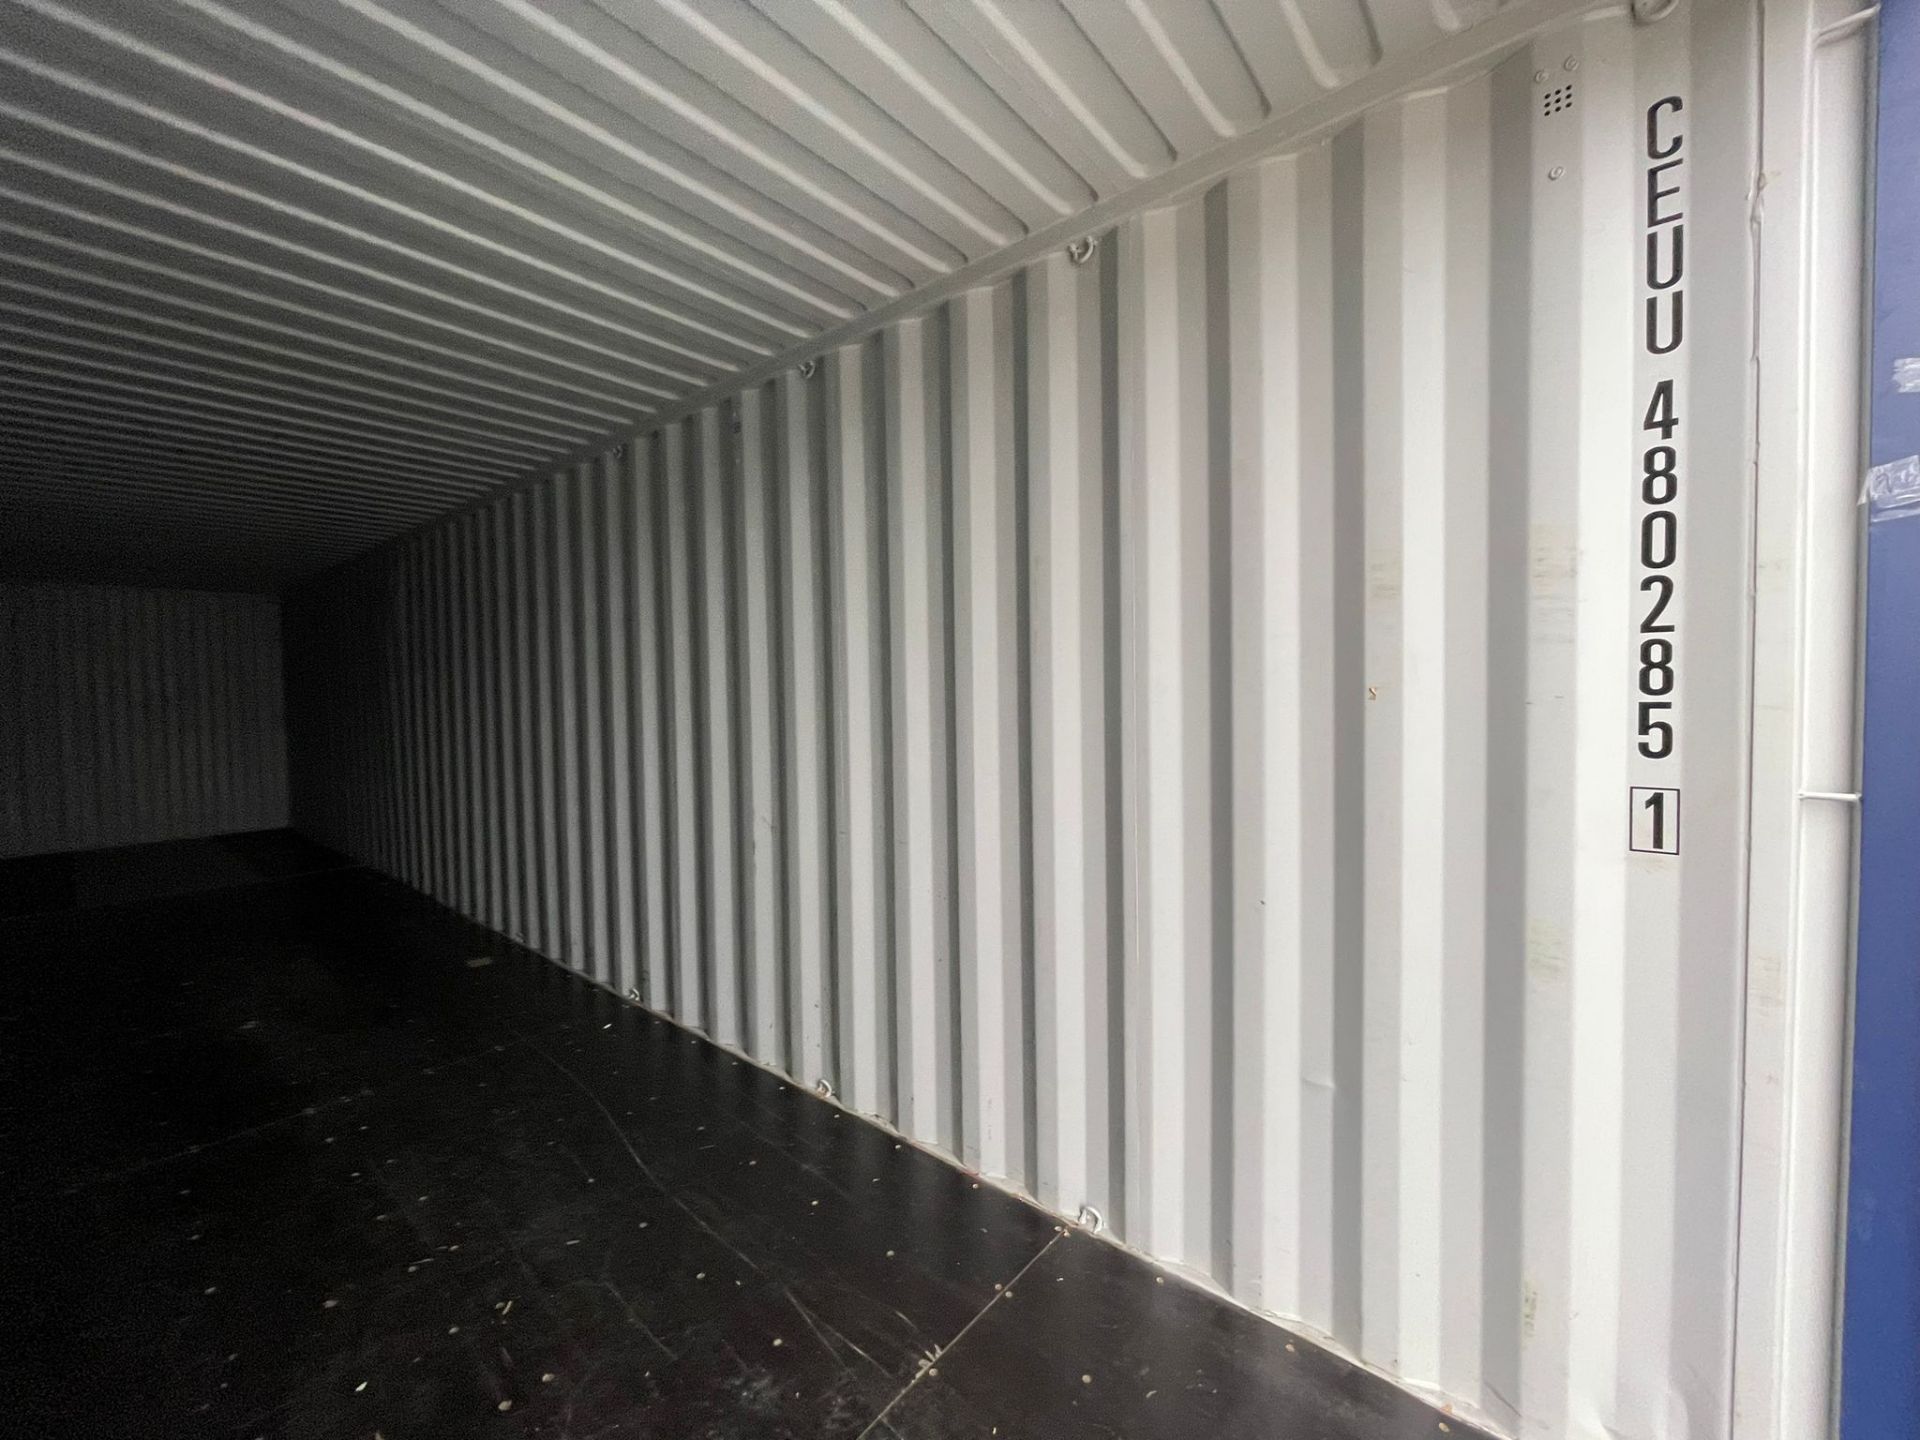 40ft HC Shipping Container - ref CEUU4802851 - Image 3 of 5